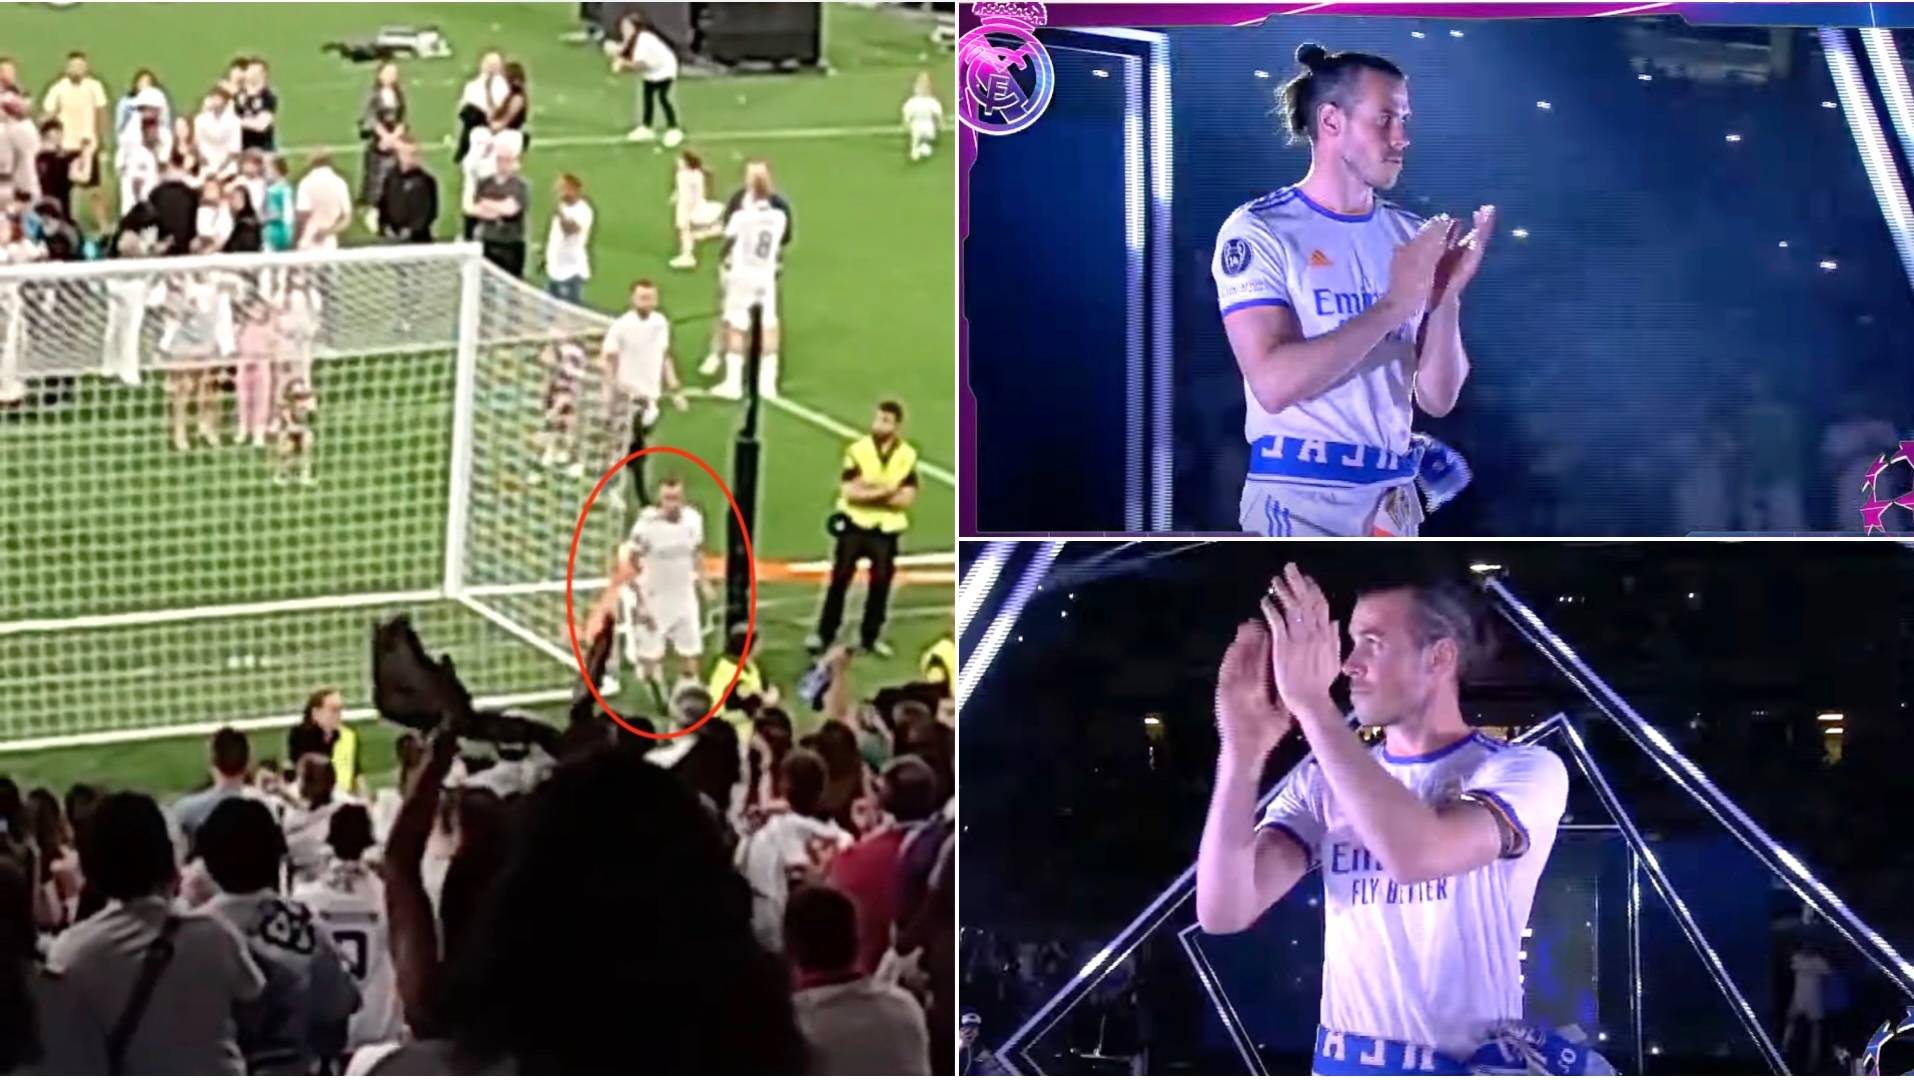 Gareth Bale got the send off he deserves from Real Madrid fans as he says goodbye